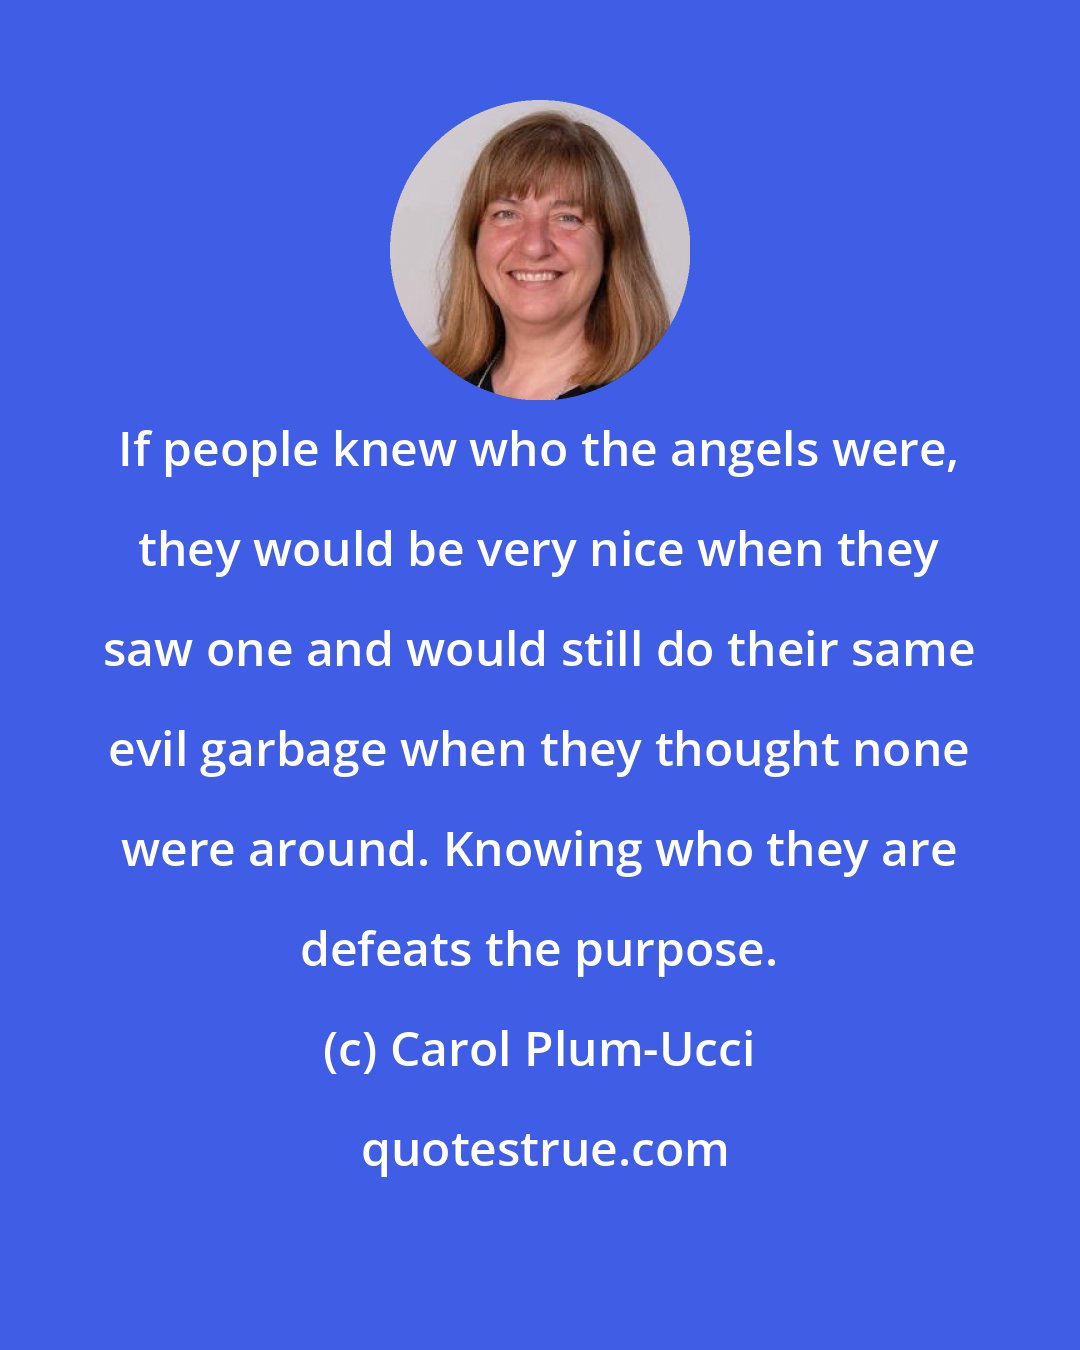 Carol Plum-Ucci: If people knew who the angels were, they would be very nice when they saw one and would still do their same evil garbage when they thought none were around. Knowing who they are defeats the purpose.